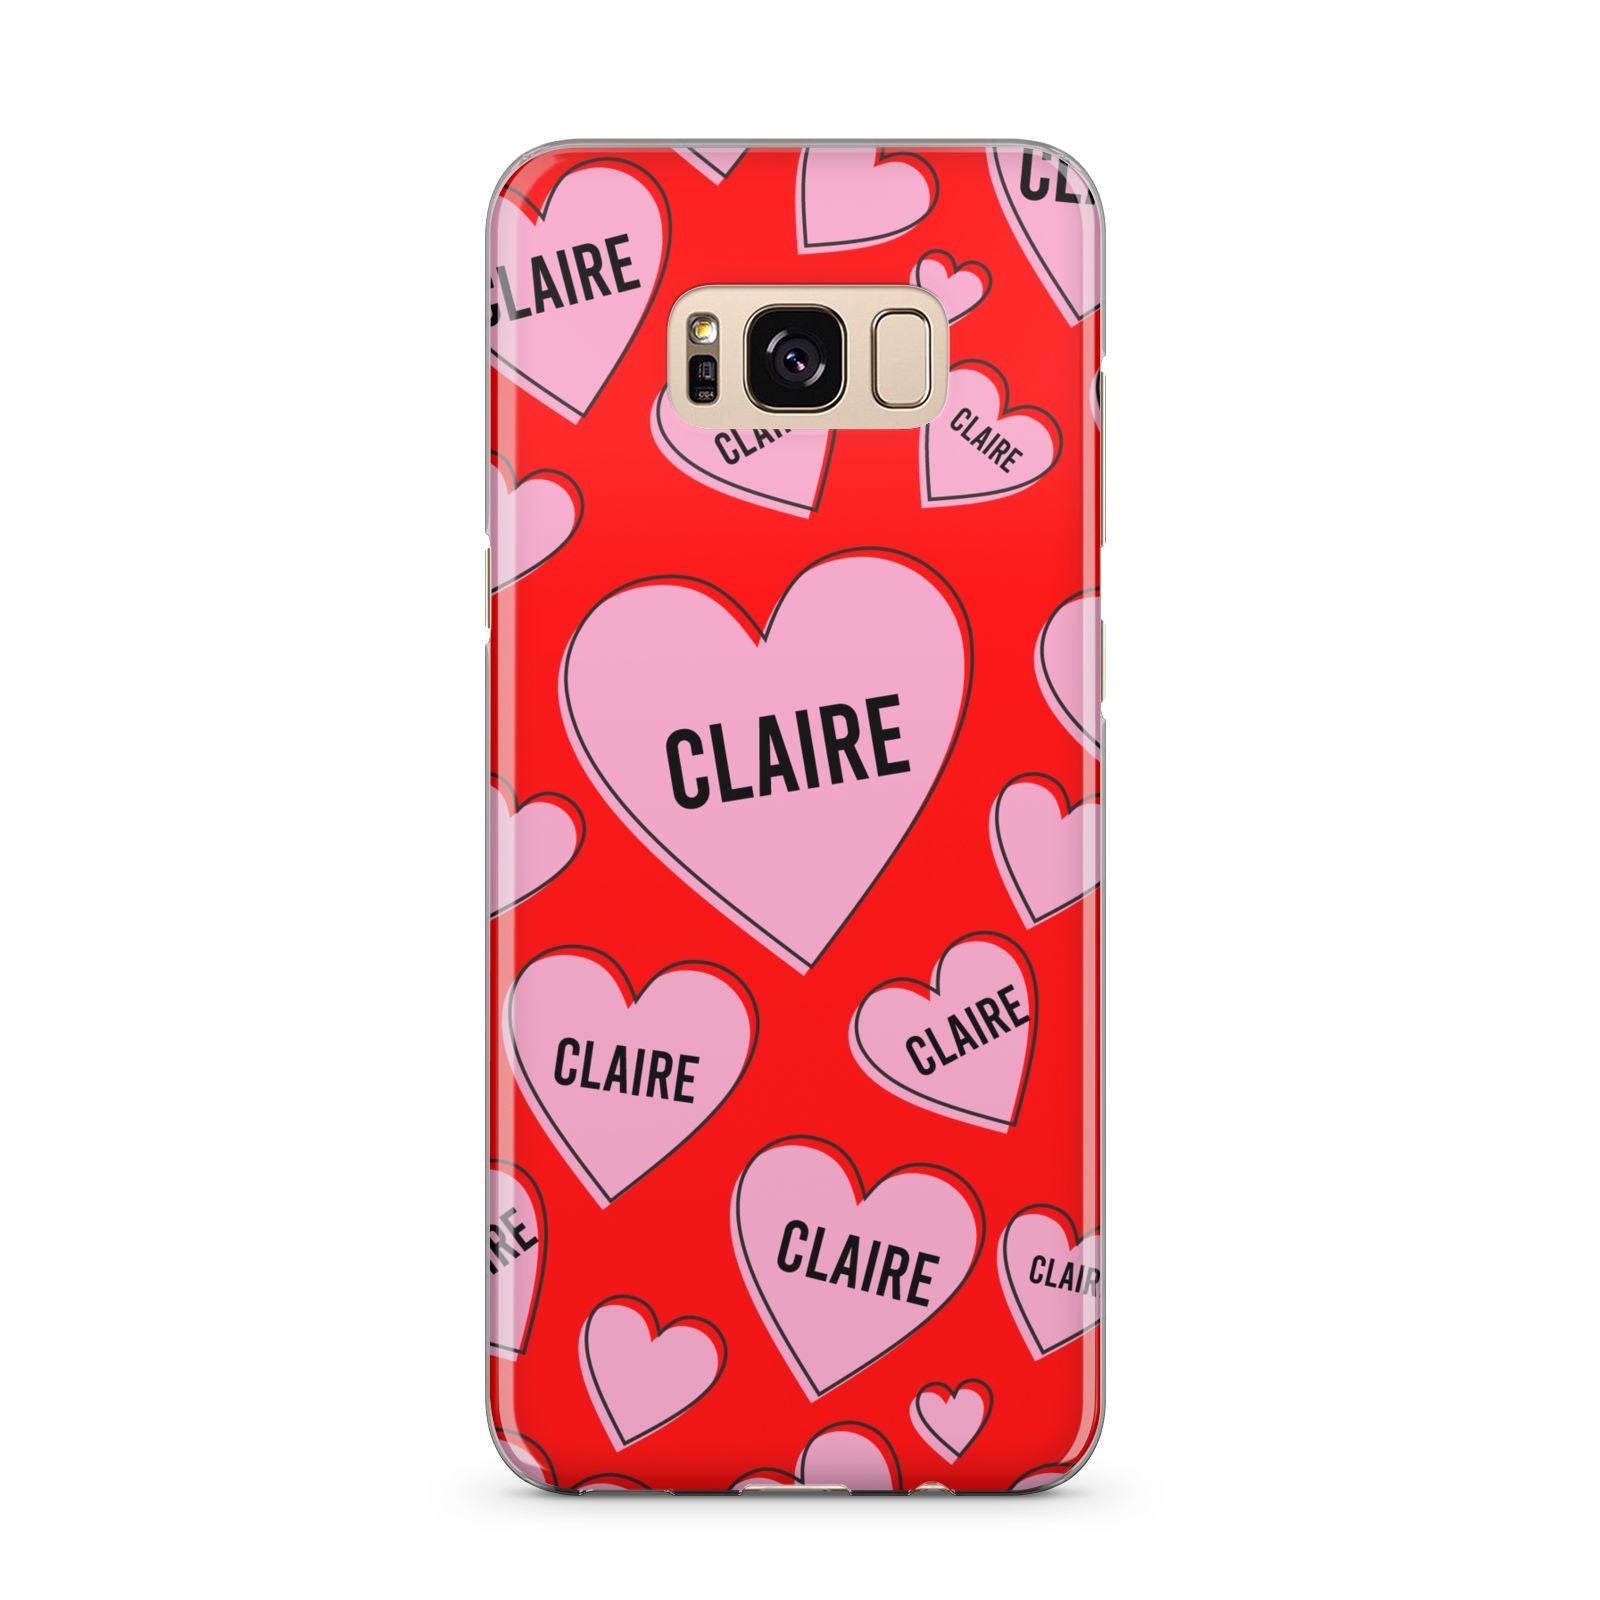 Personalised Hearts Samsung Galaxy S8 Plus Case